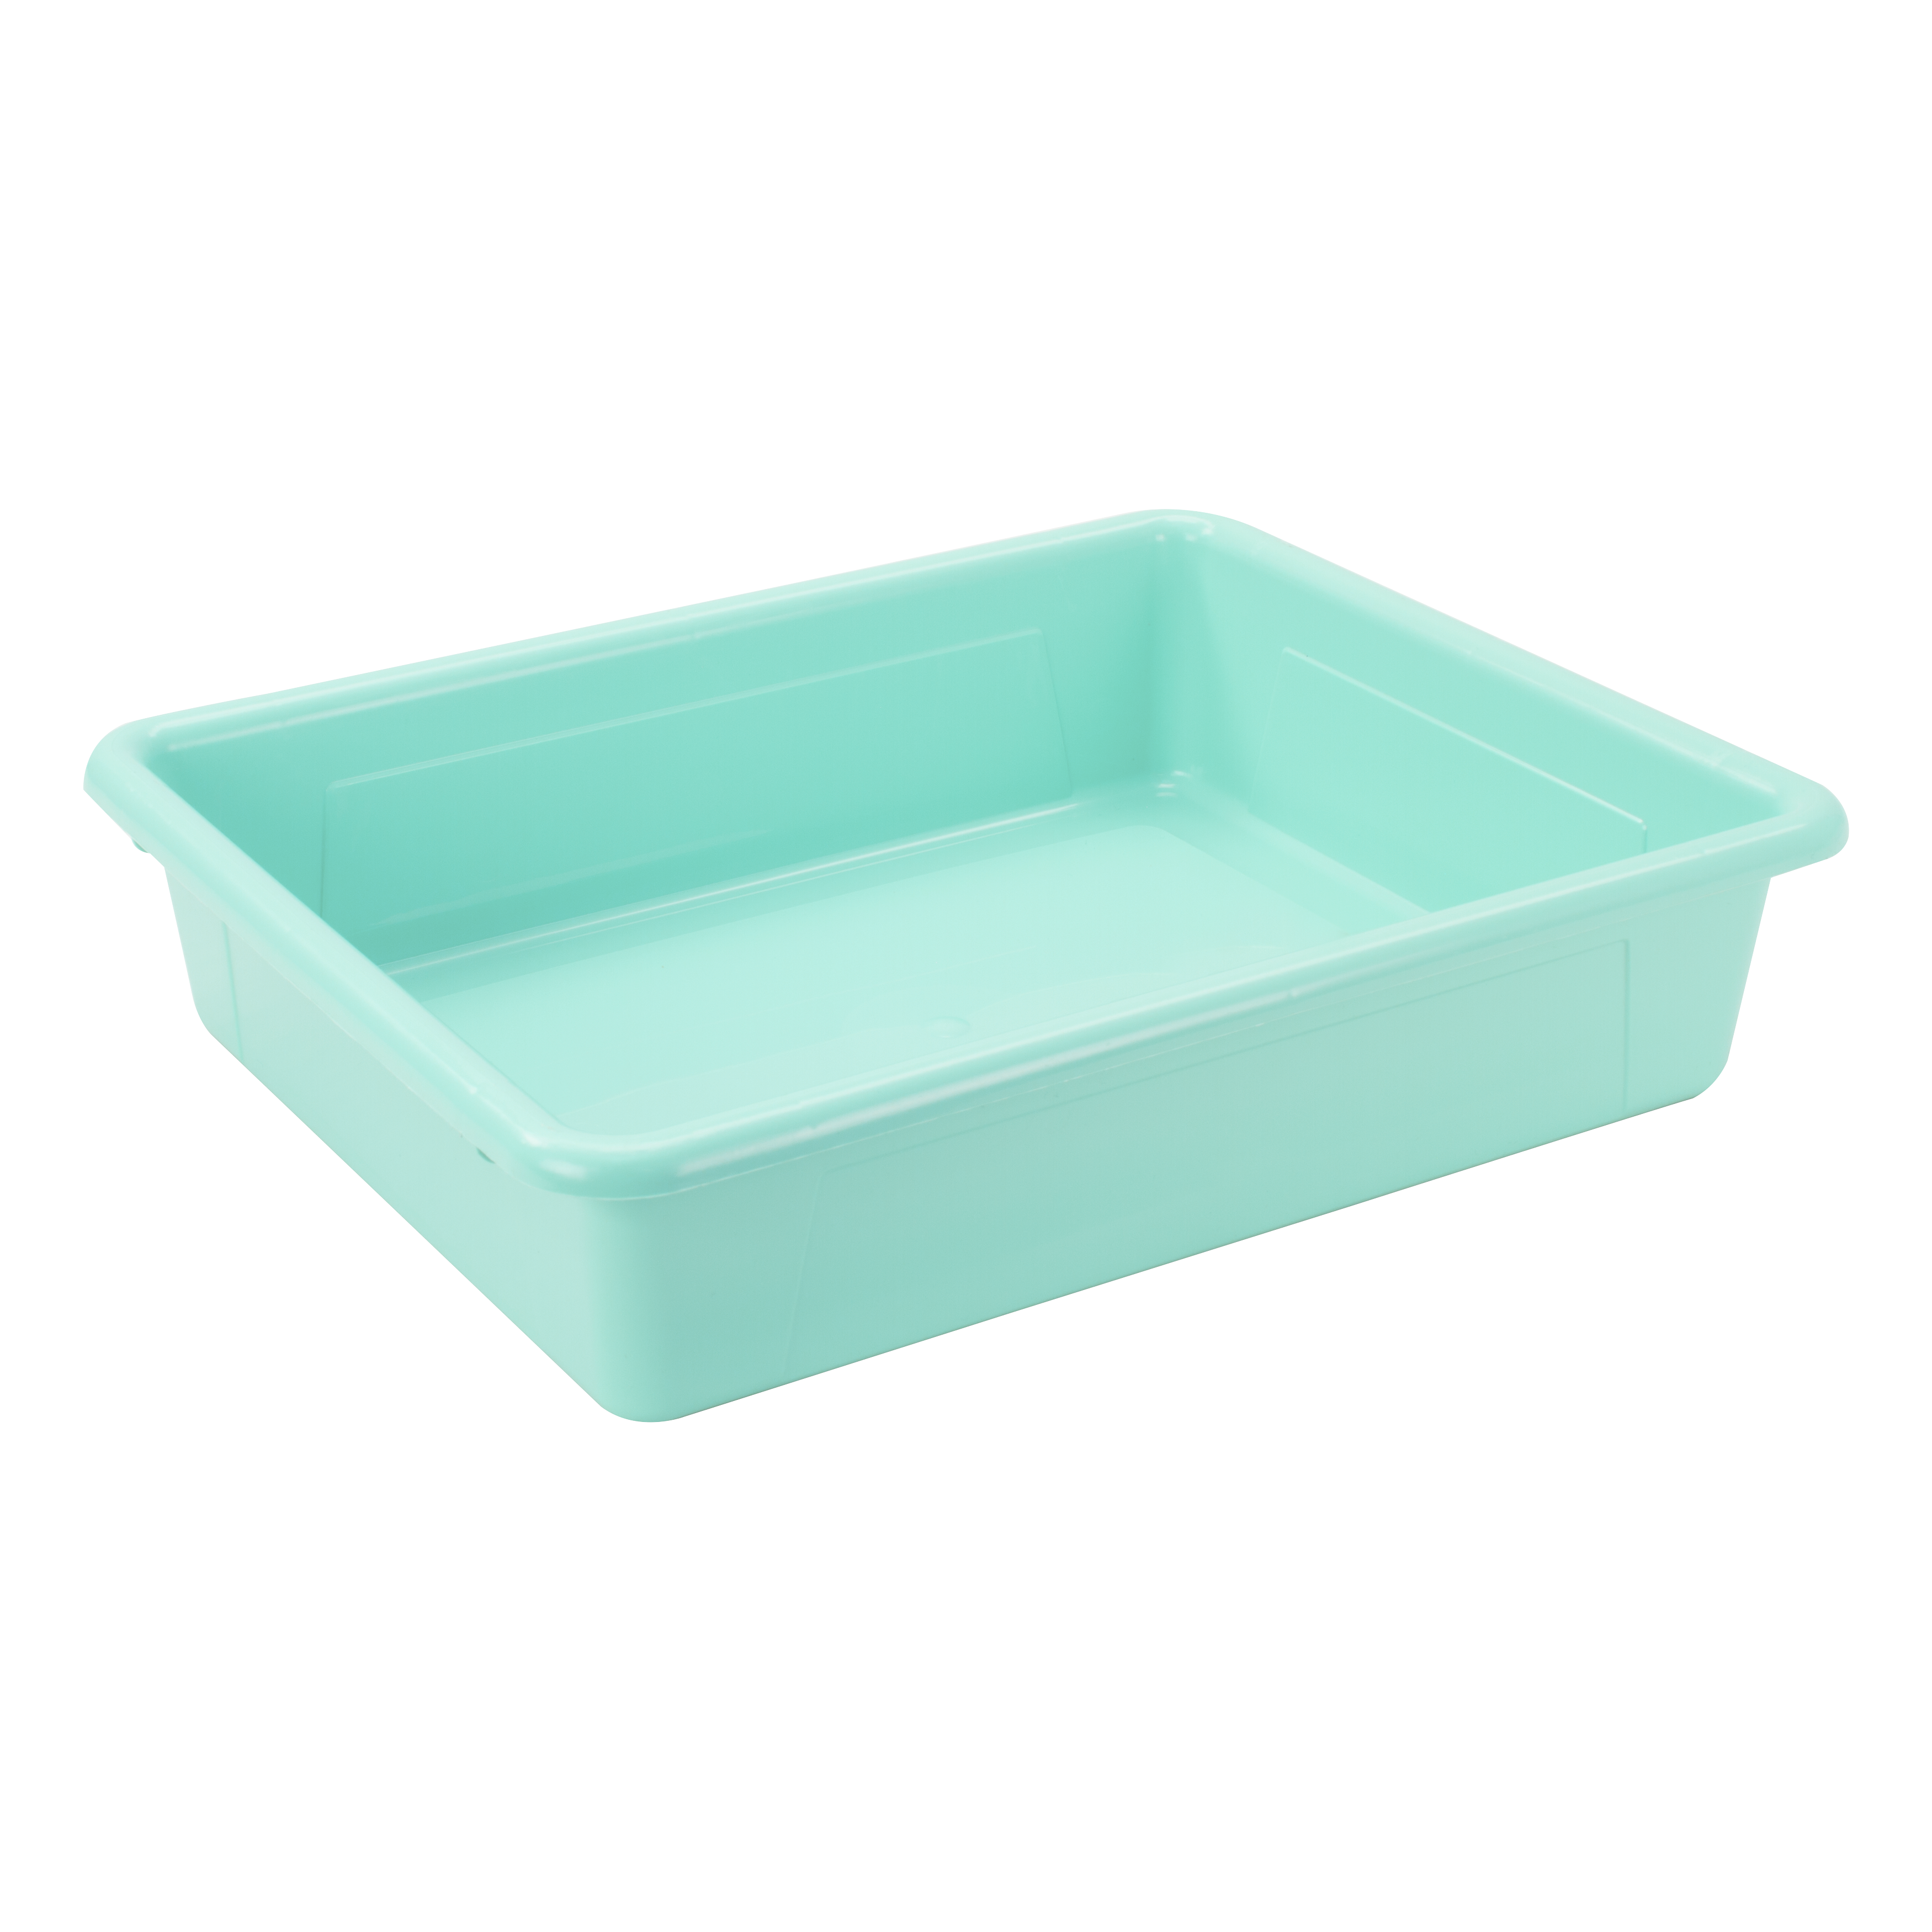 Storex Storage Tray, Letter size, 10 x 13 x 3 Inches, Teal